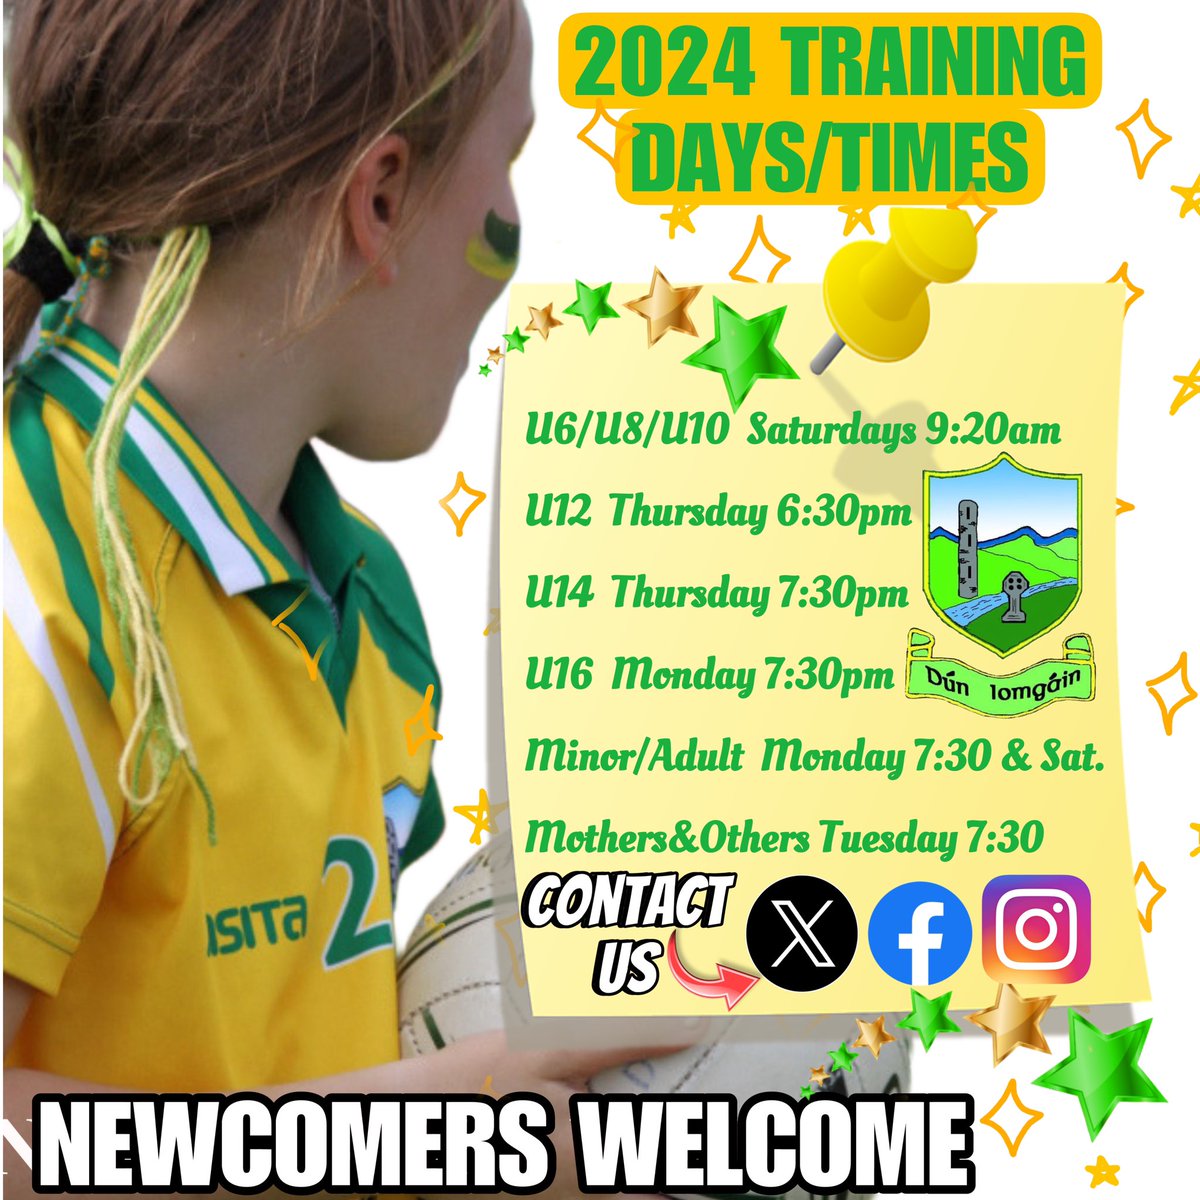 ALL SURROUNDING PARISHES CATERED FOR CONTACT US HERE ON TWITTER FOR MORE INFORMATION 💚🏐💛 #lgfa #dunnalgfc @kilkennylgfa